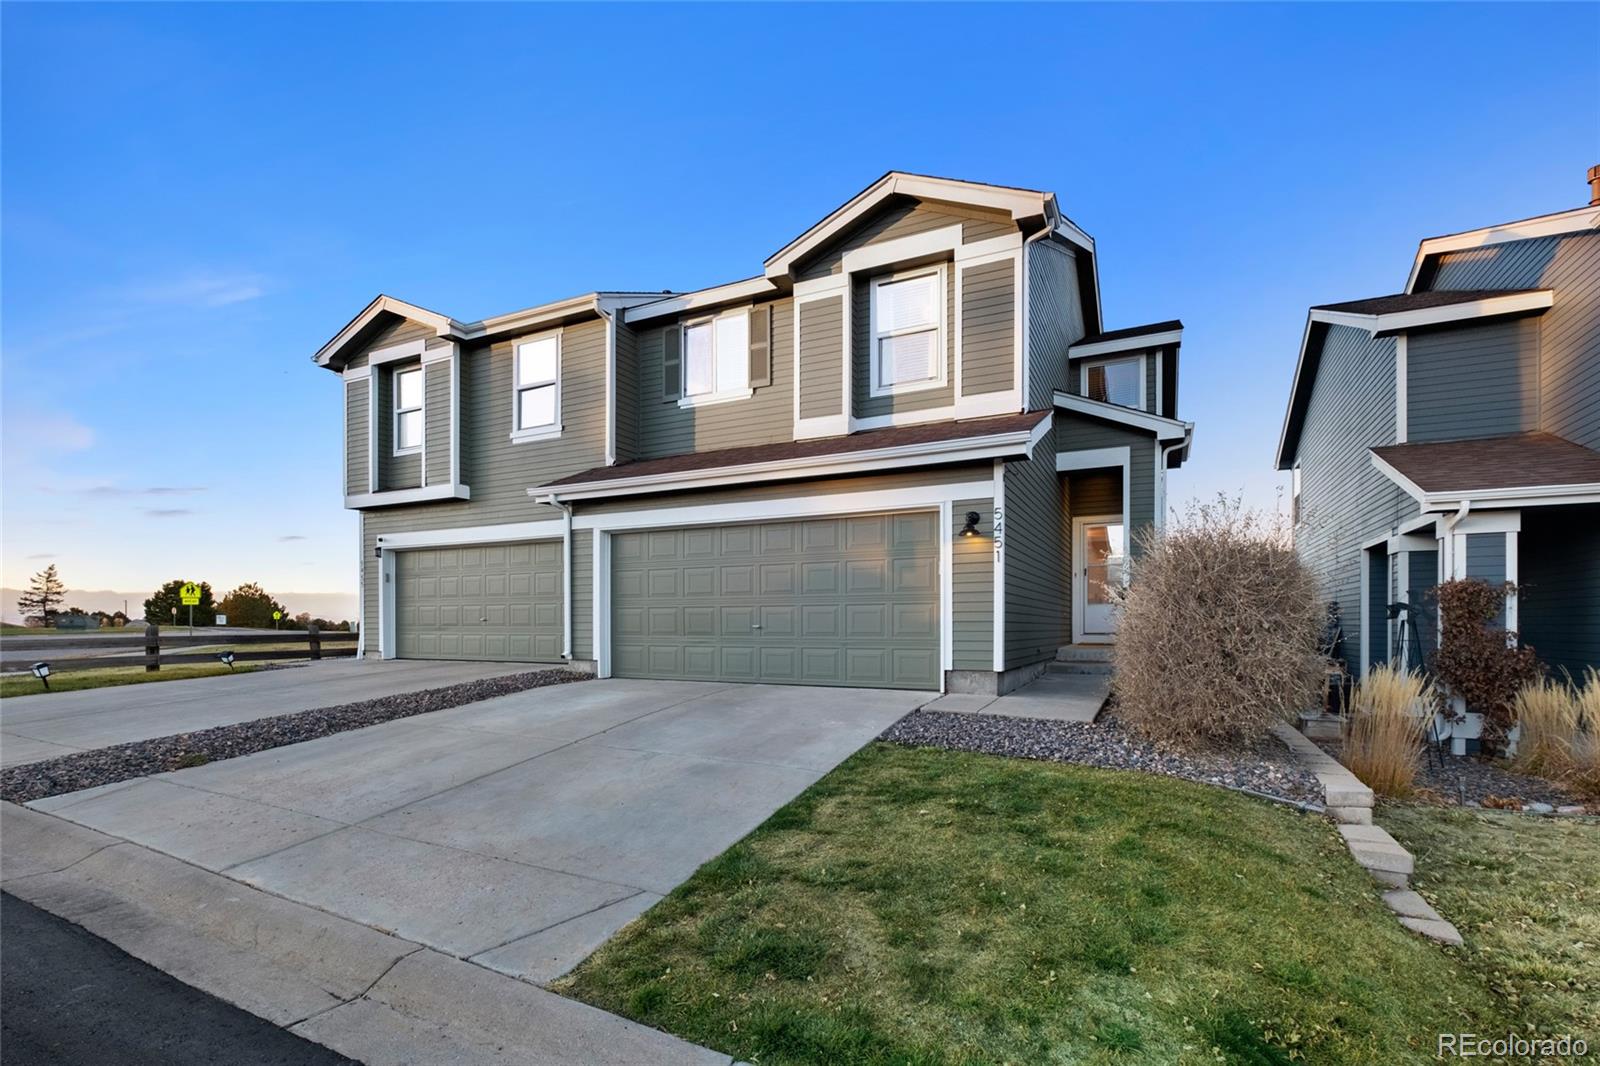 Report Image for 5451 S Picadilly Court,Aurora, Colorado